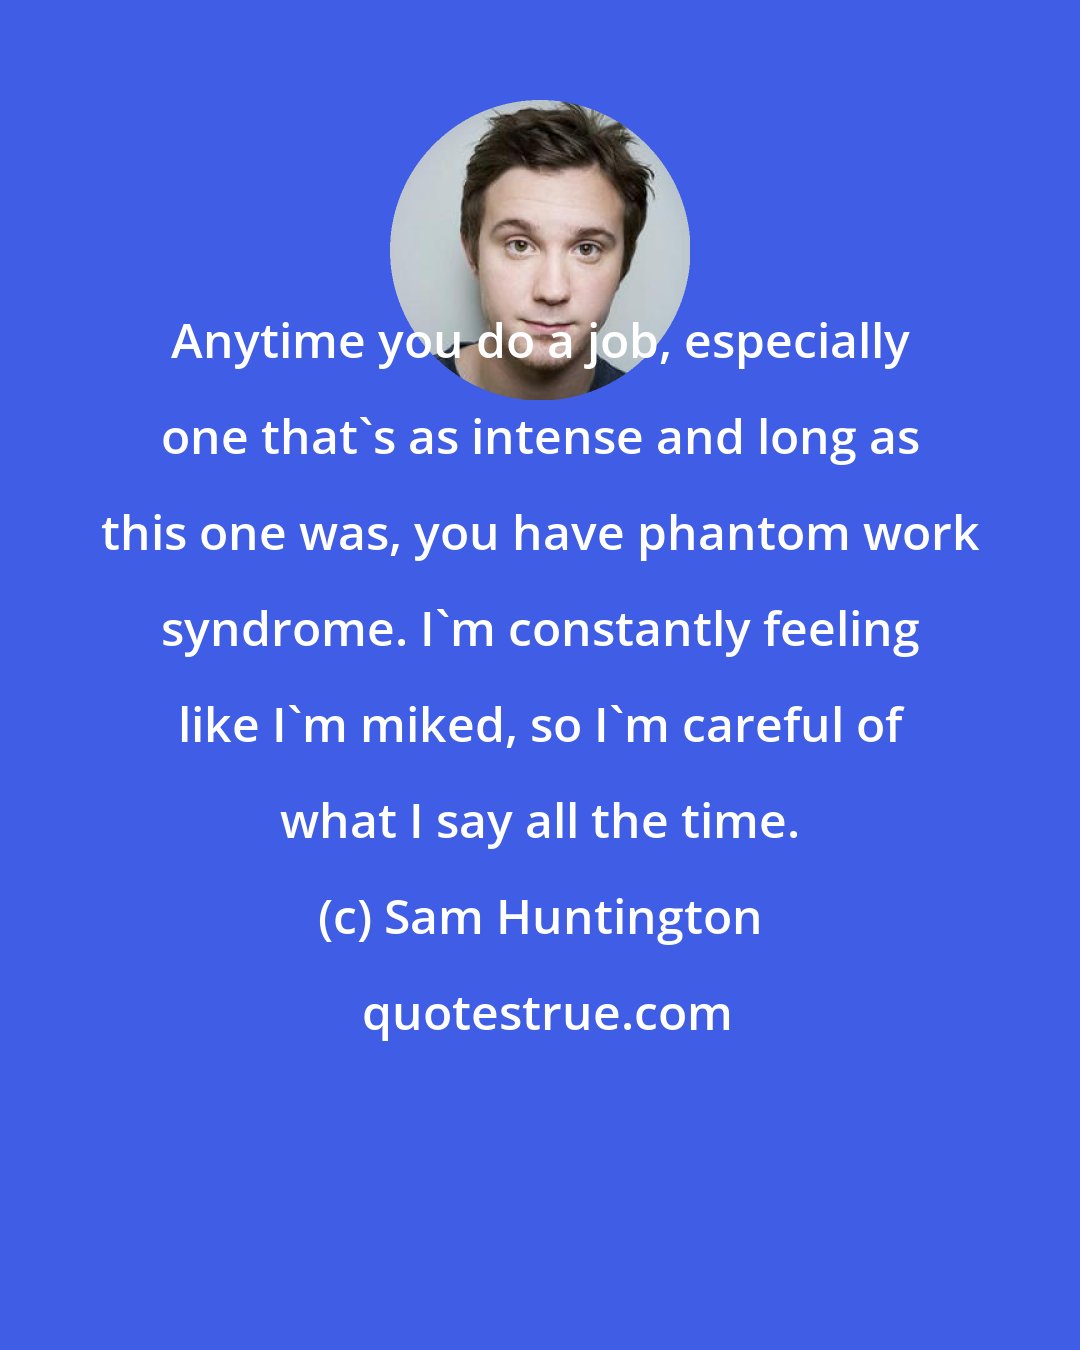 Sam Huntington: Anytime you do a job, especially one that's as intense and long as this one was, you have phantom work syndrome. I'm constantly feeling like I'm miked, so I'm careful of what I say all the time.